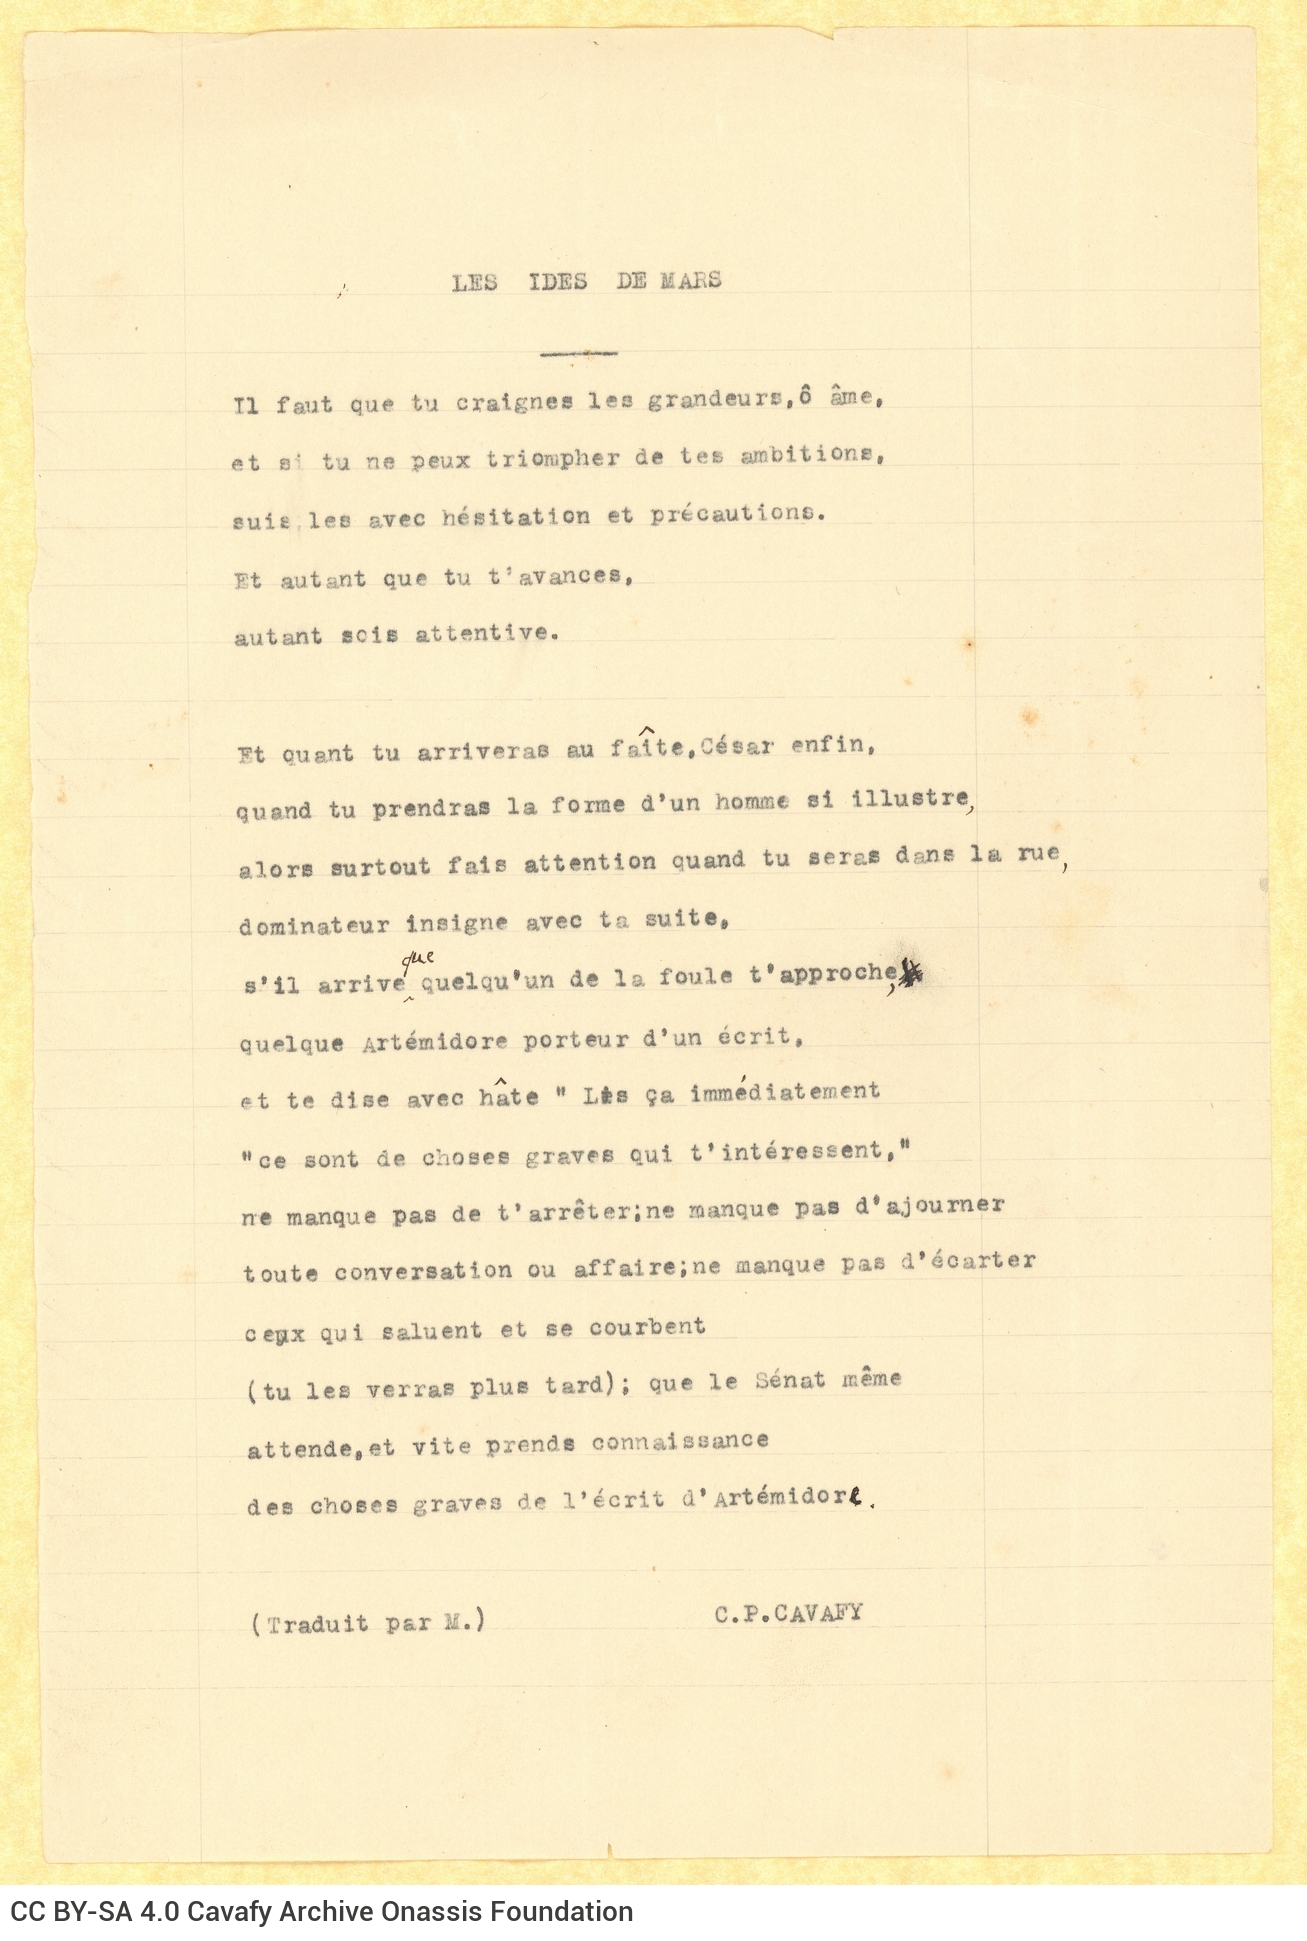 Typewritten French translations of the poems "But Wise Men Apprehend What Is Imminent" and "Ides of March" on one side of two